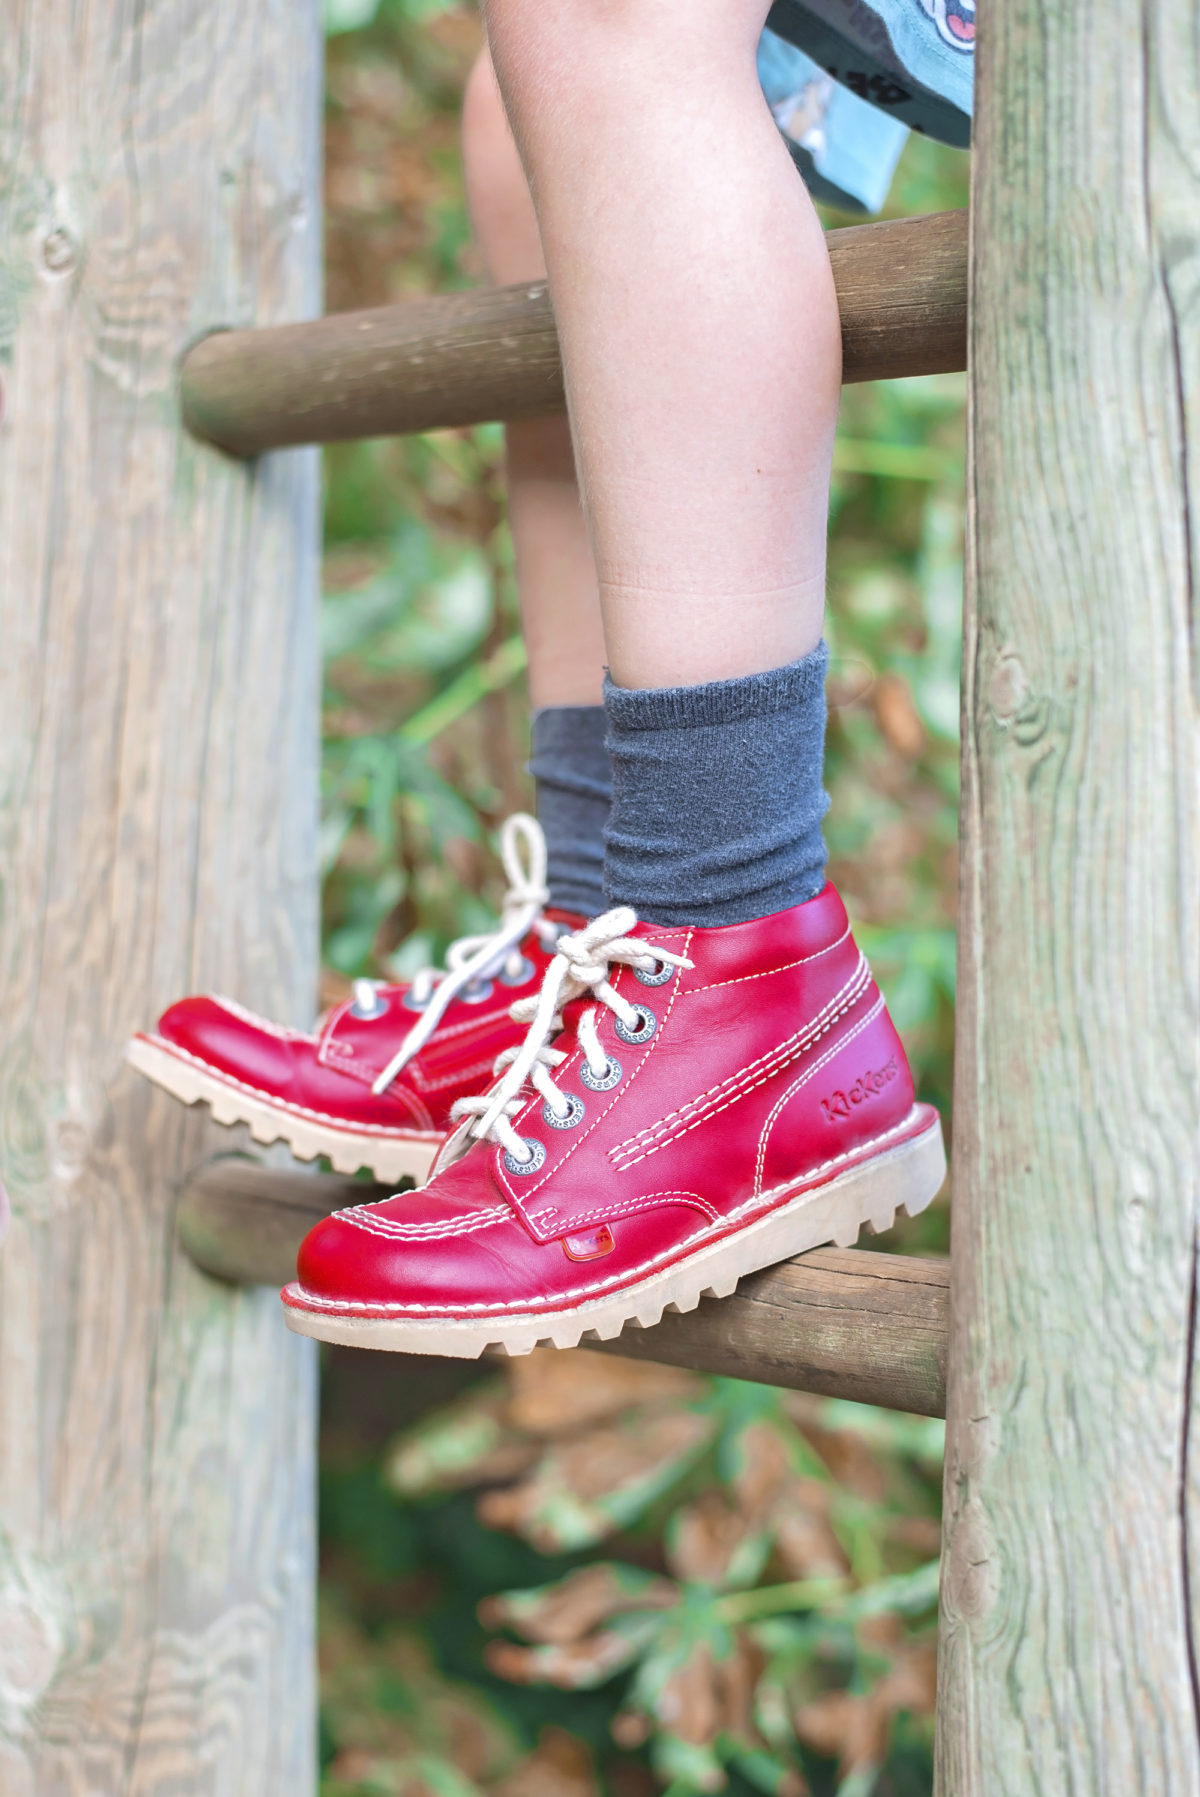 Back to school with Very.co.uk. Red kickers boots resting on a wooden playground ladder being worn by a boy with grey socks.